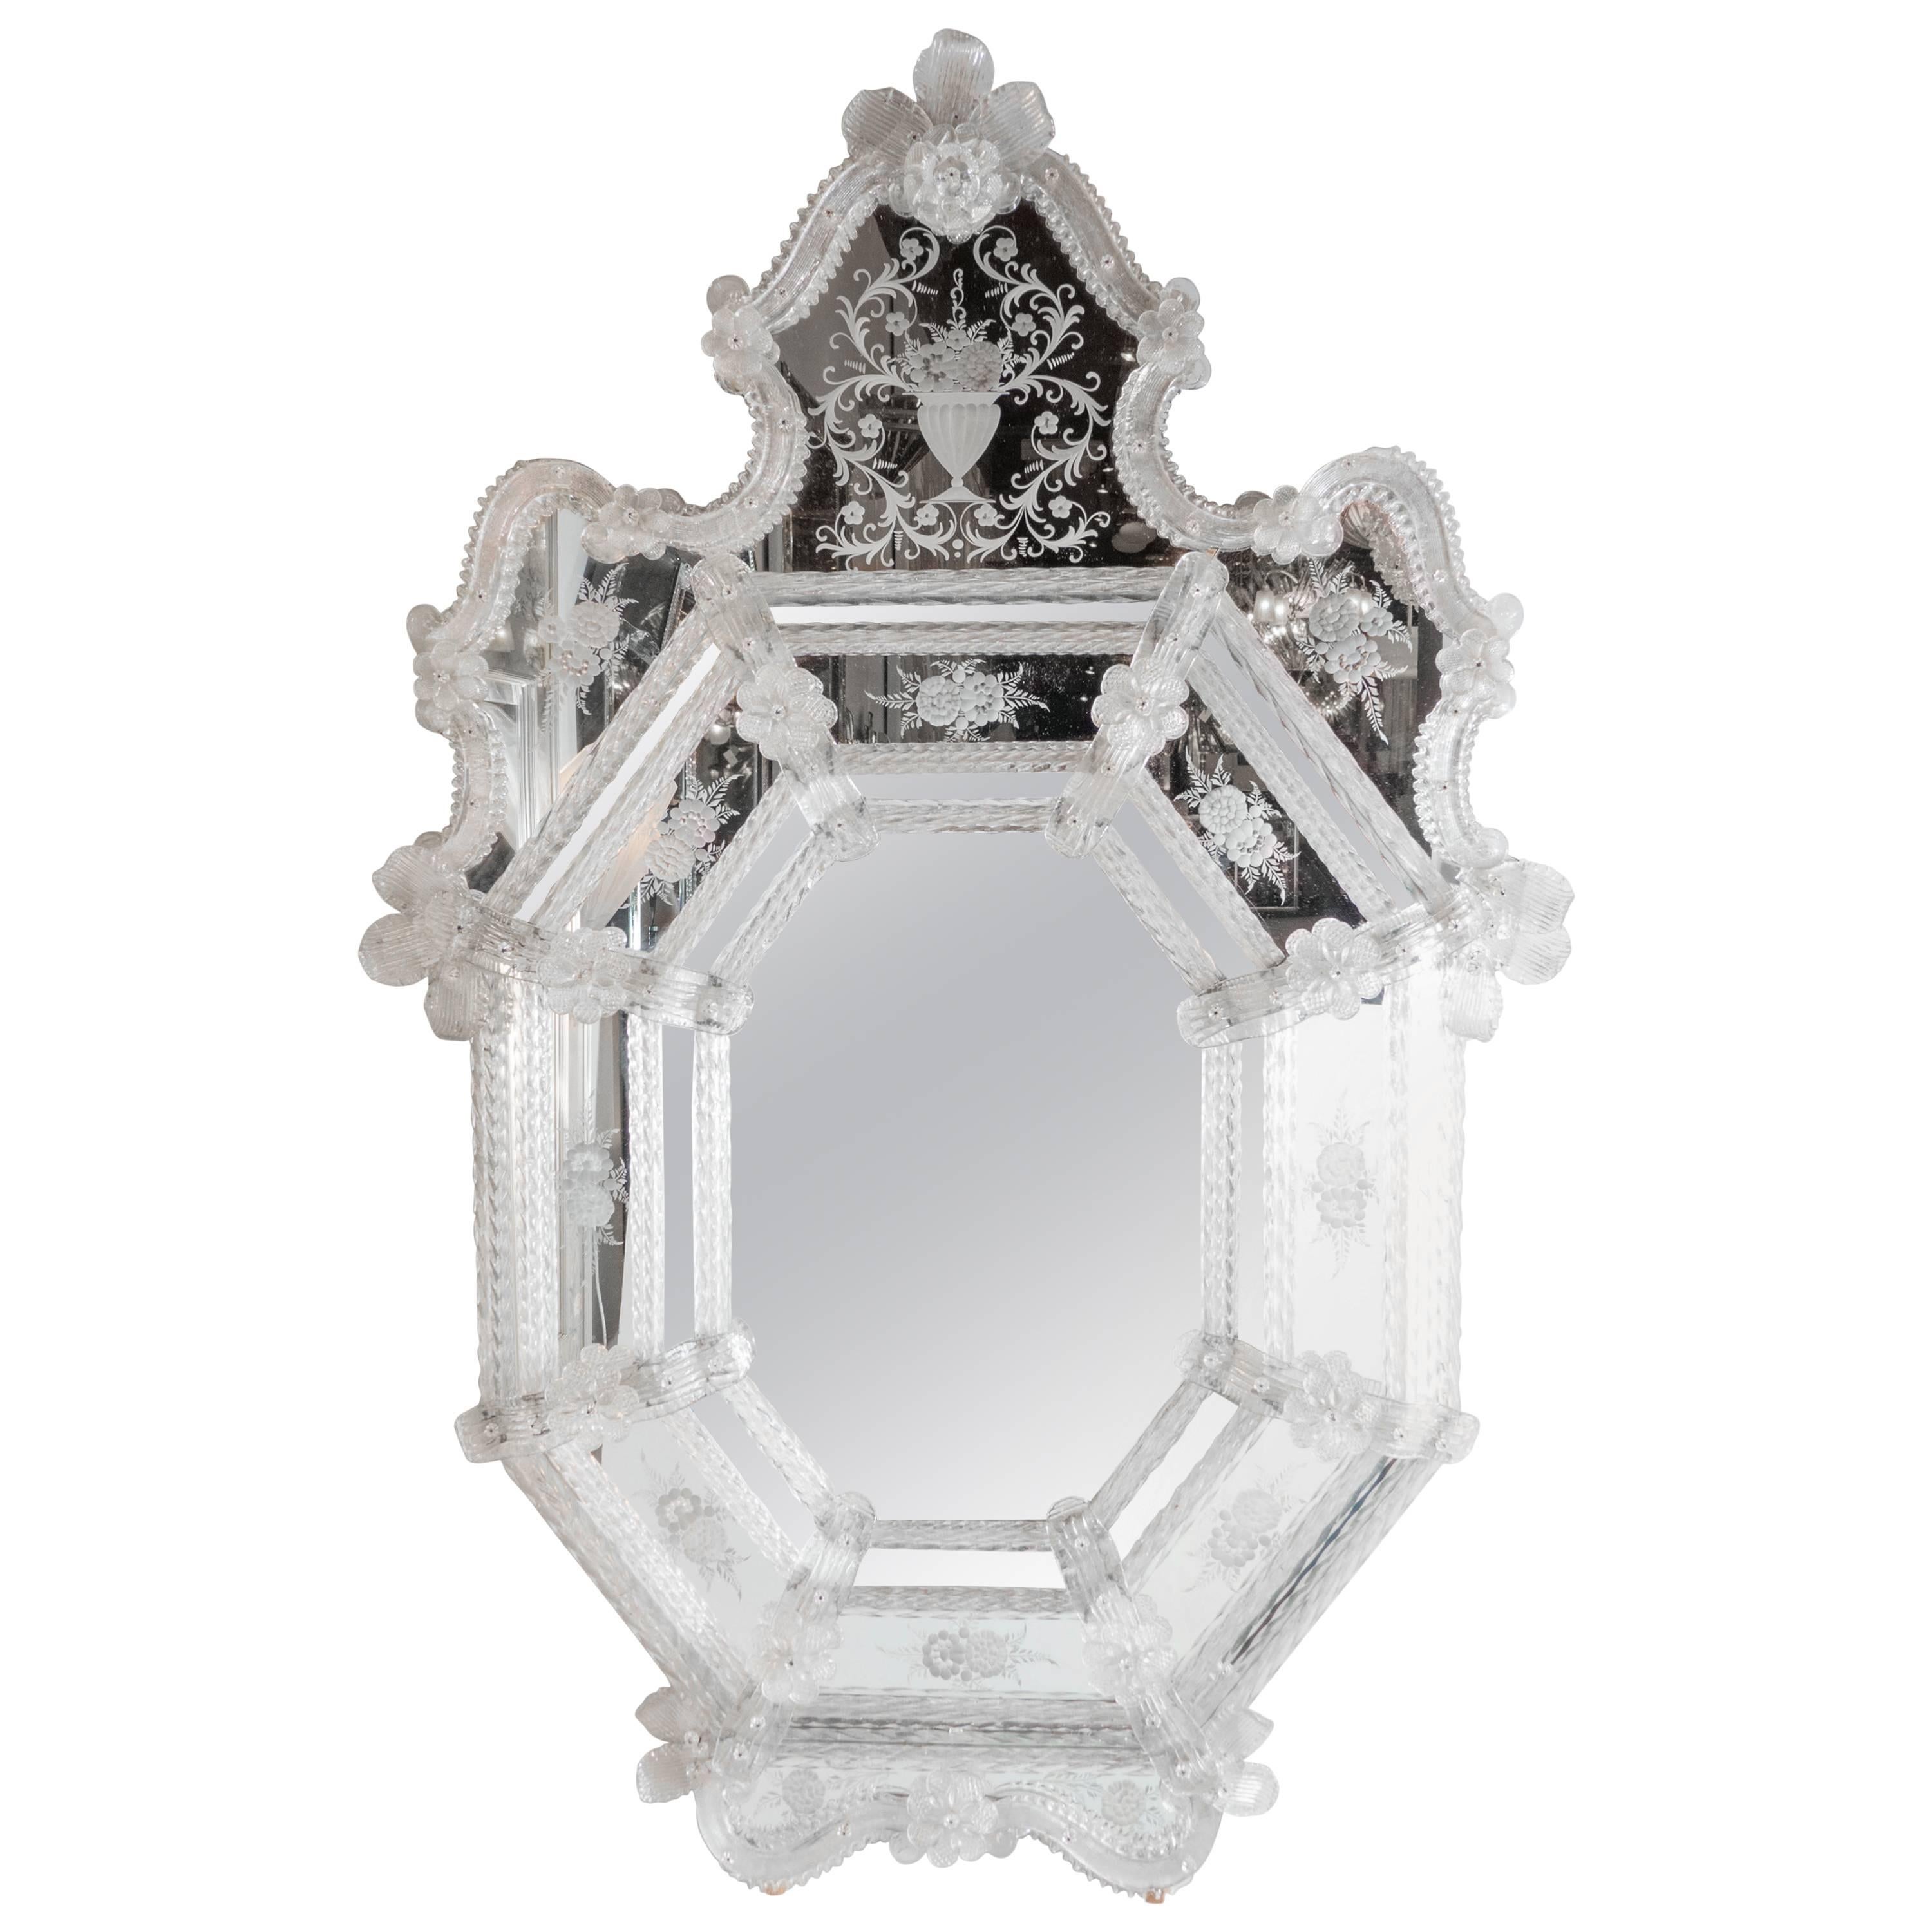 Murano Venetian Mirror with Intricate Stylized Floral and Foliage Appliques